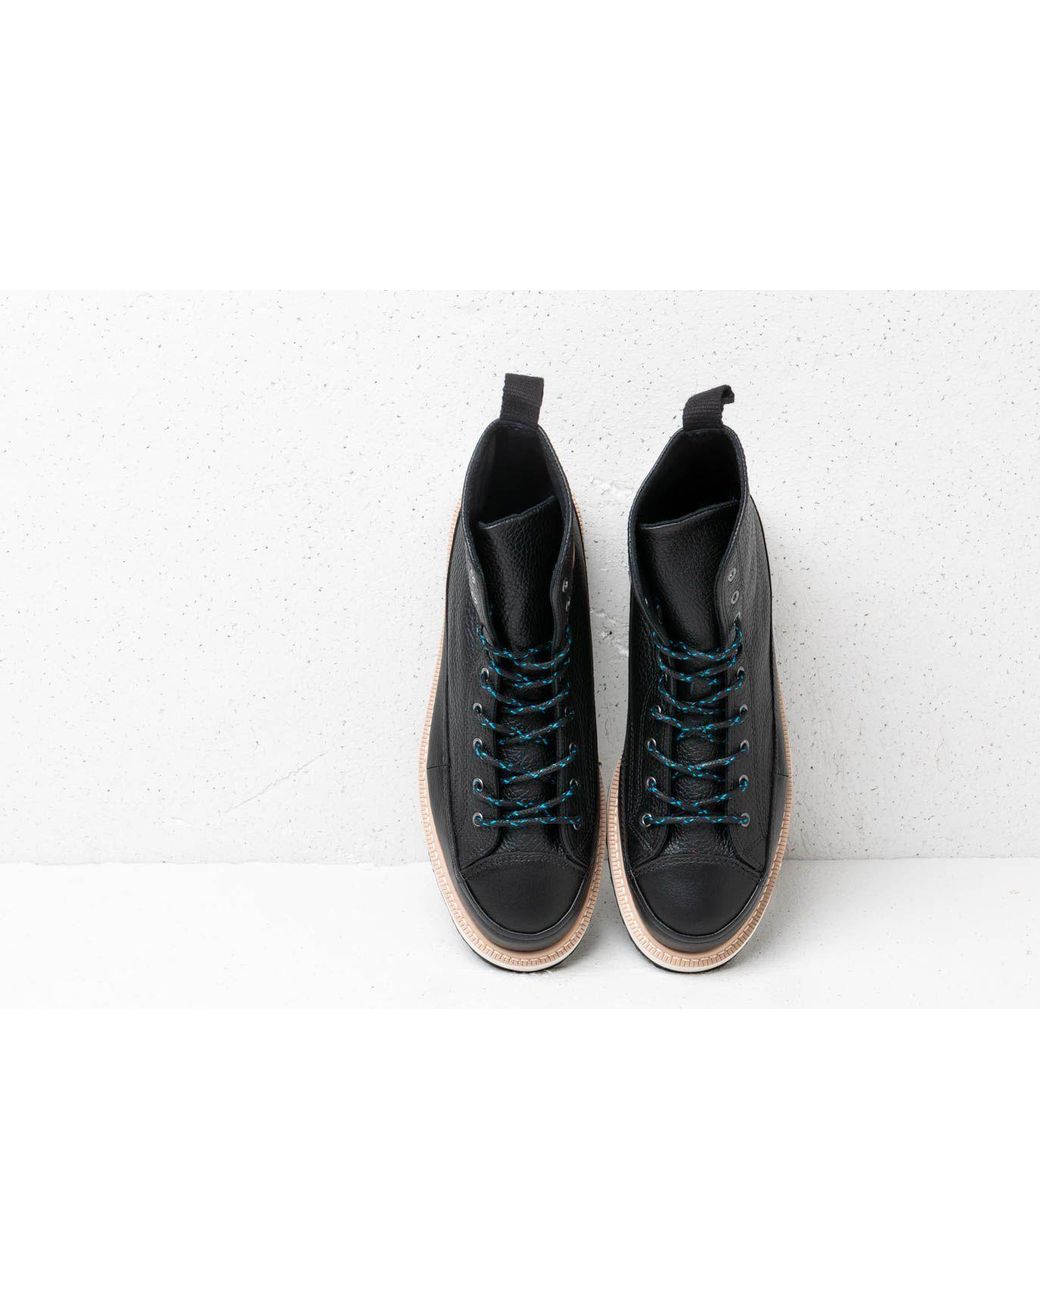 Converse Chuck Taylor Crafted Boot High Black/ Light Fawn/ Black | Lyst AT